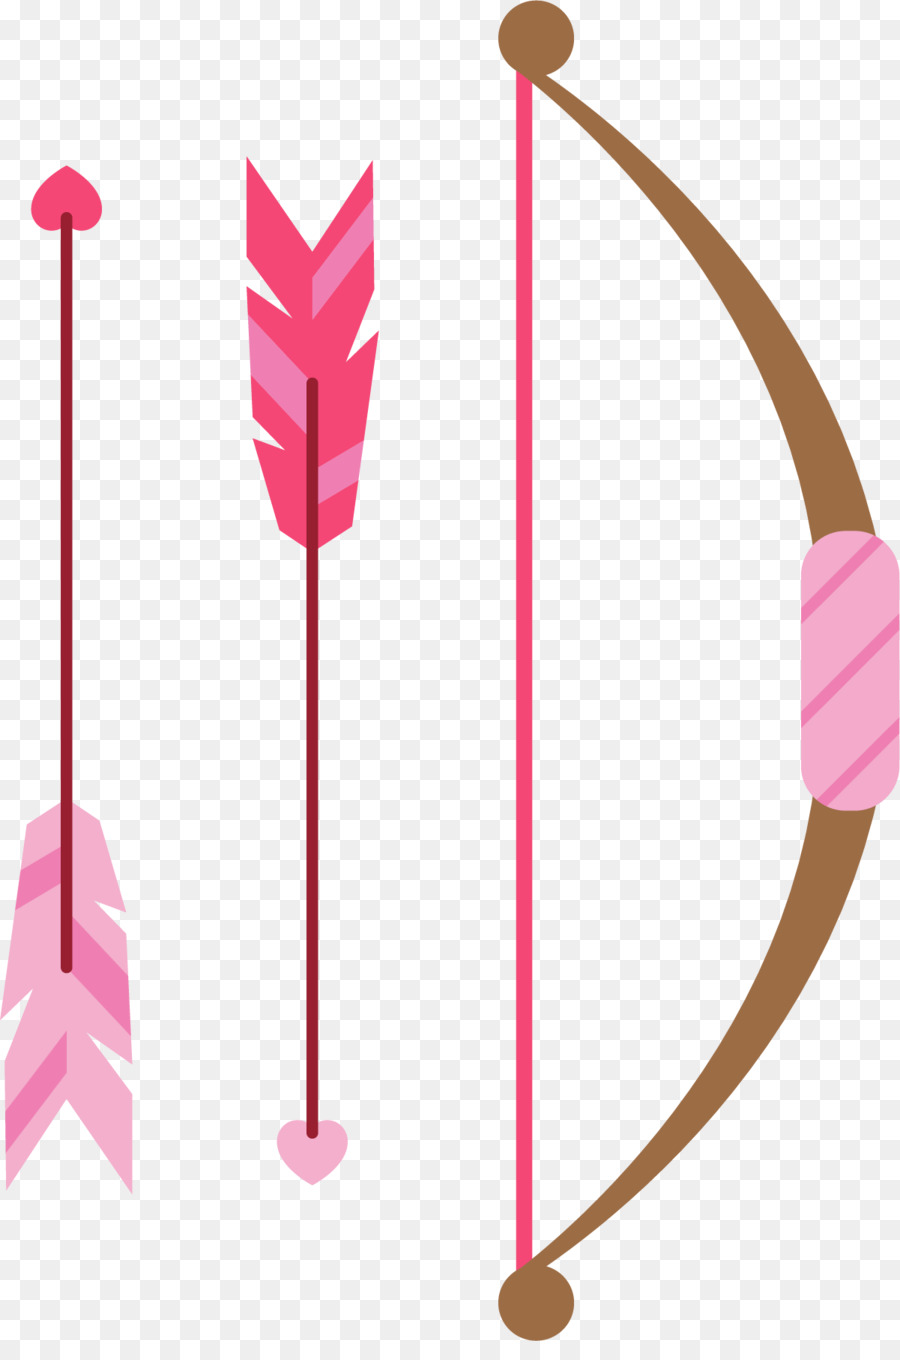 Arrow Feather Clip art - Hand painted pink feather arrow arrow png download - 1201*1789 - Free Transparent Arrow png Download.